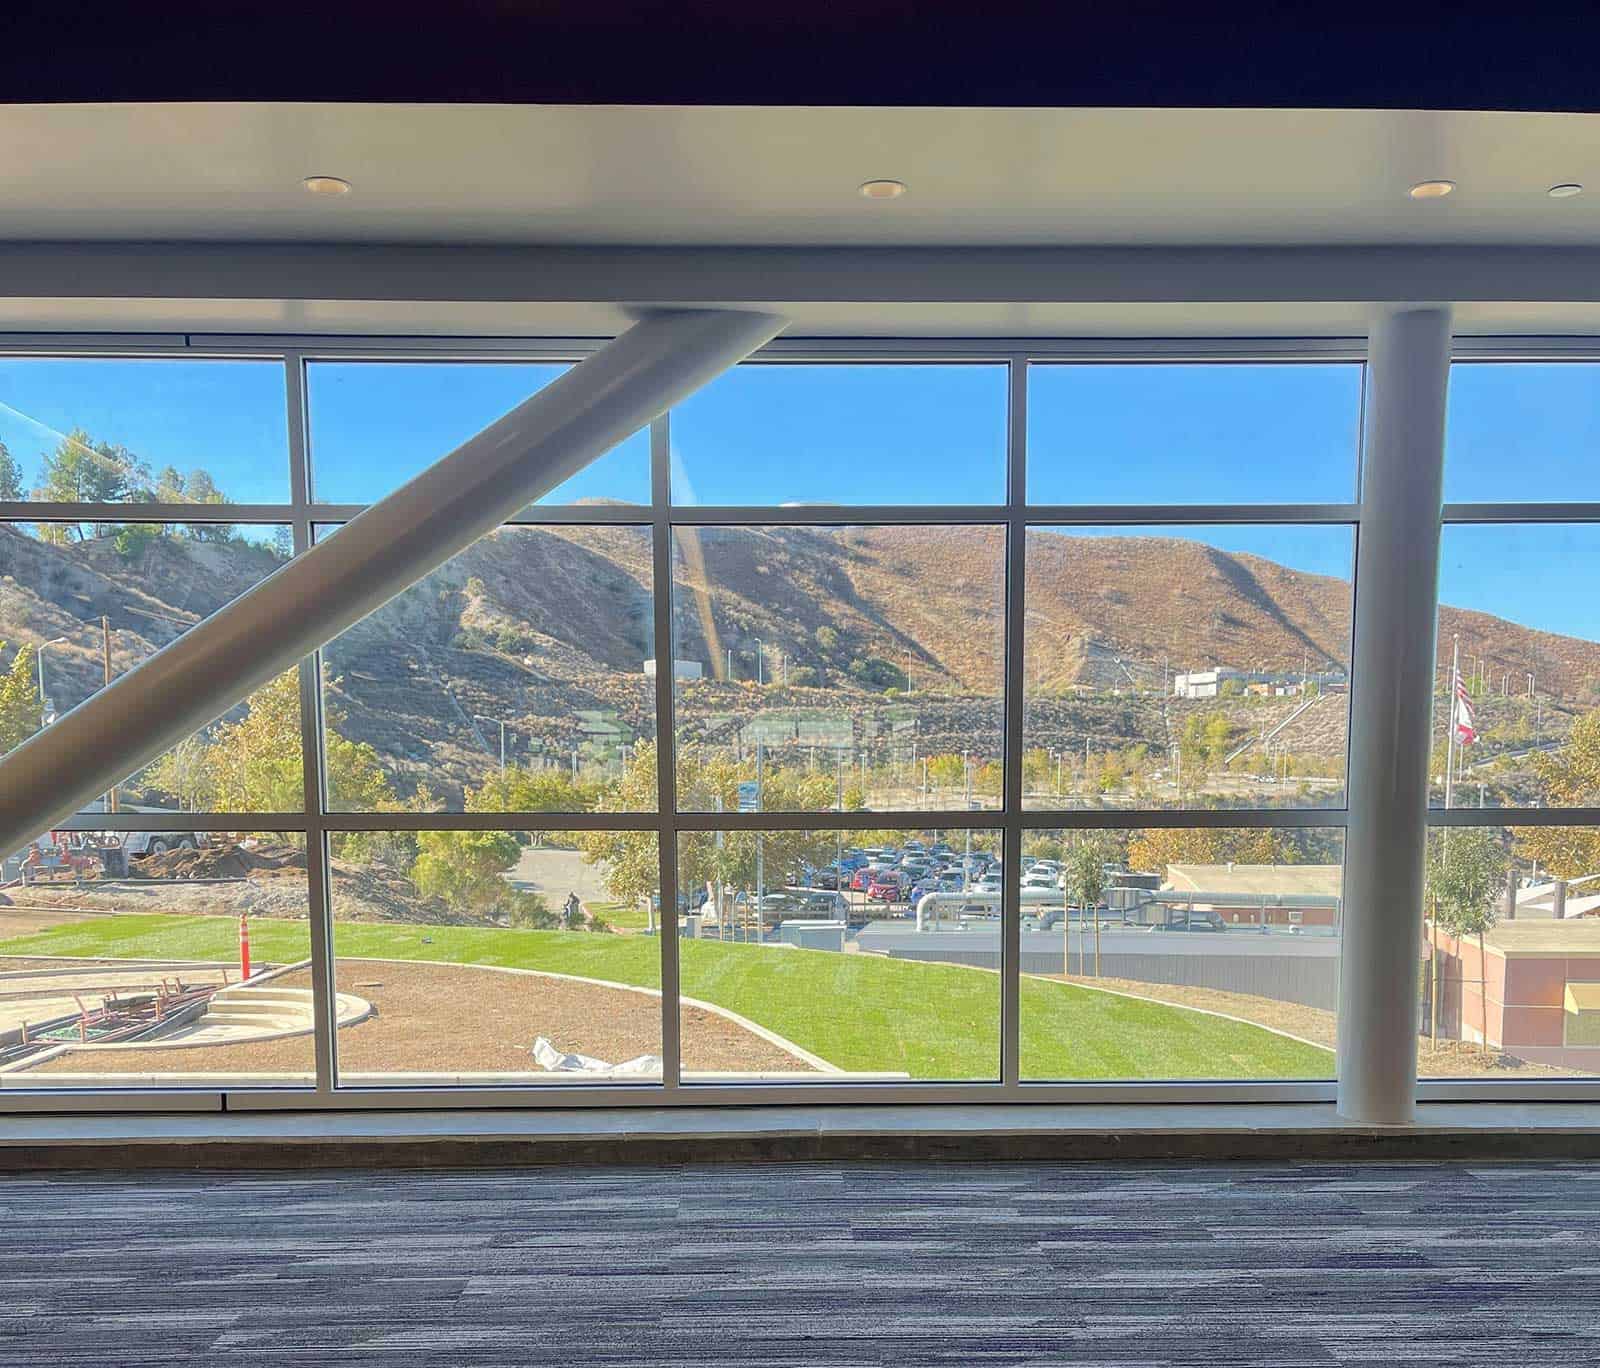 College of the Canyons SSLRC Library has great views of the surrounding countryside